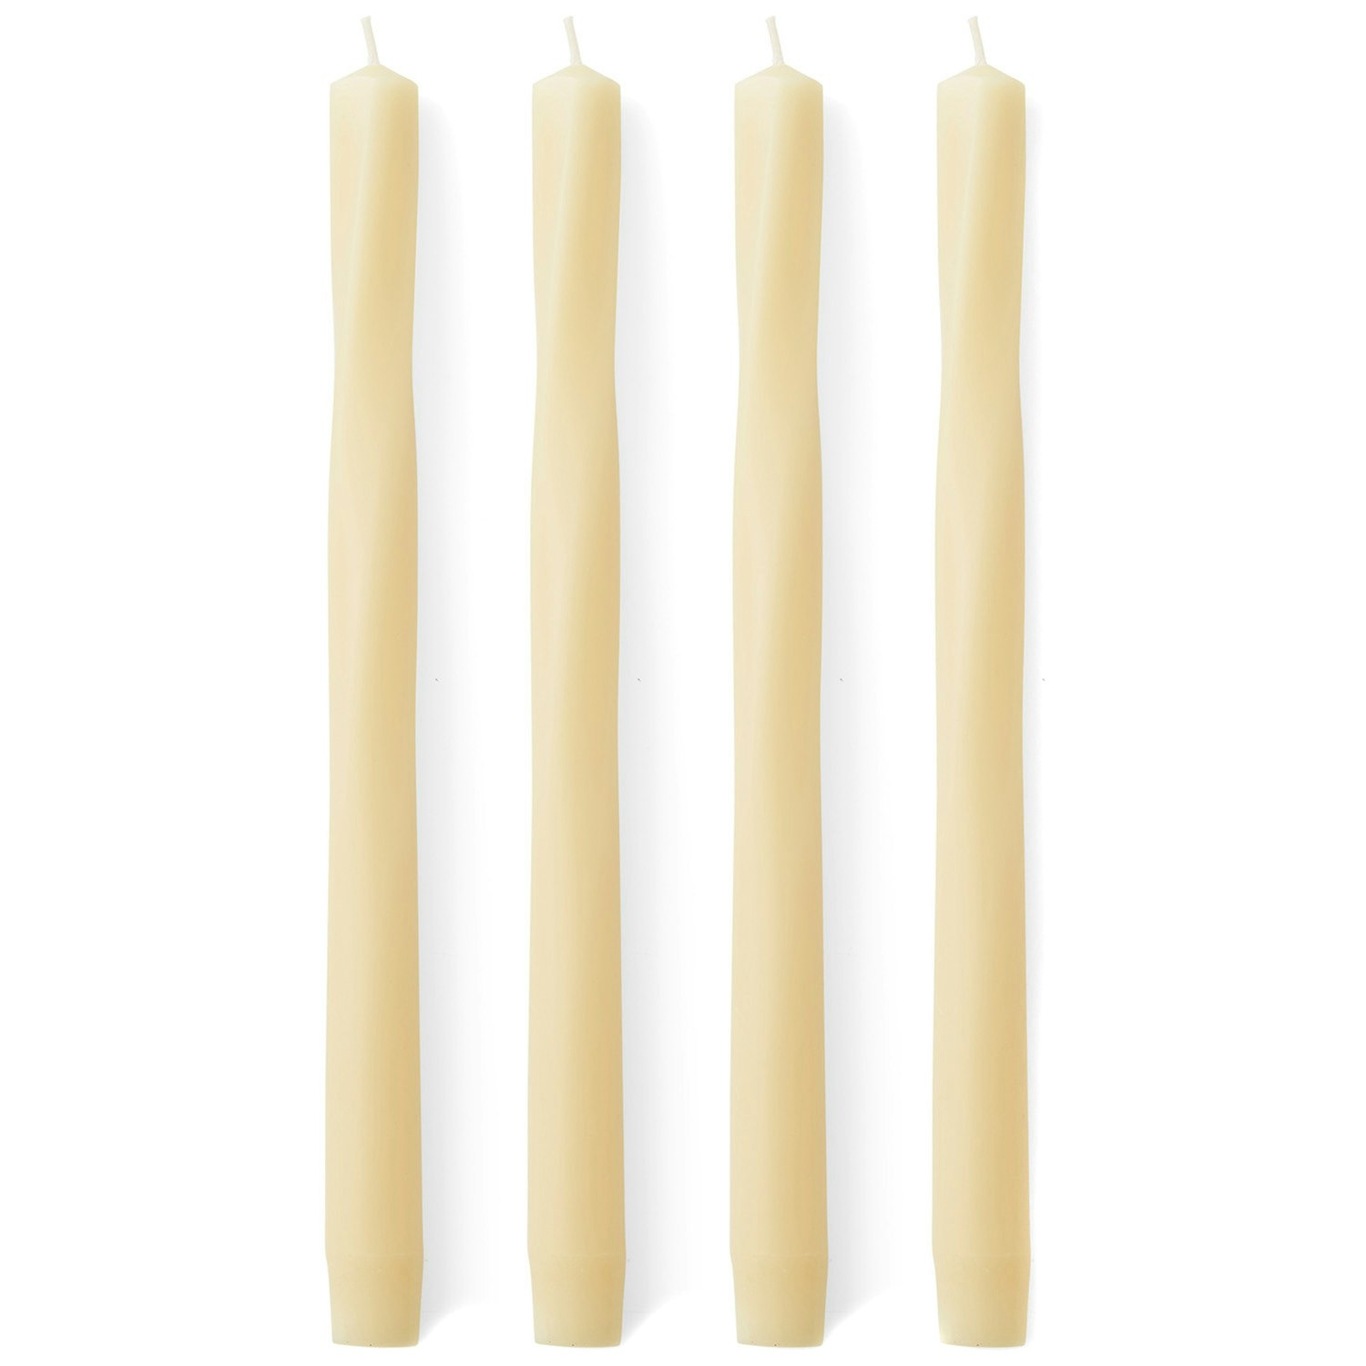 Twist Candles 4-pack, Ivory